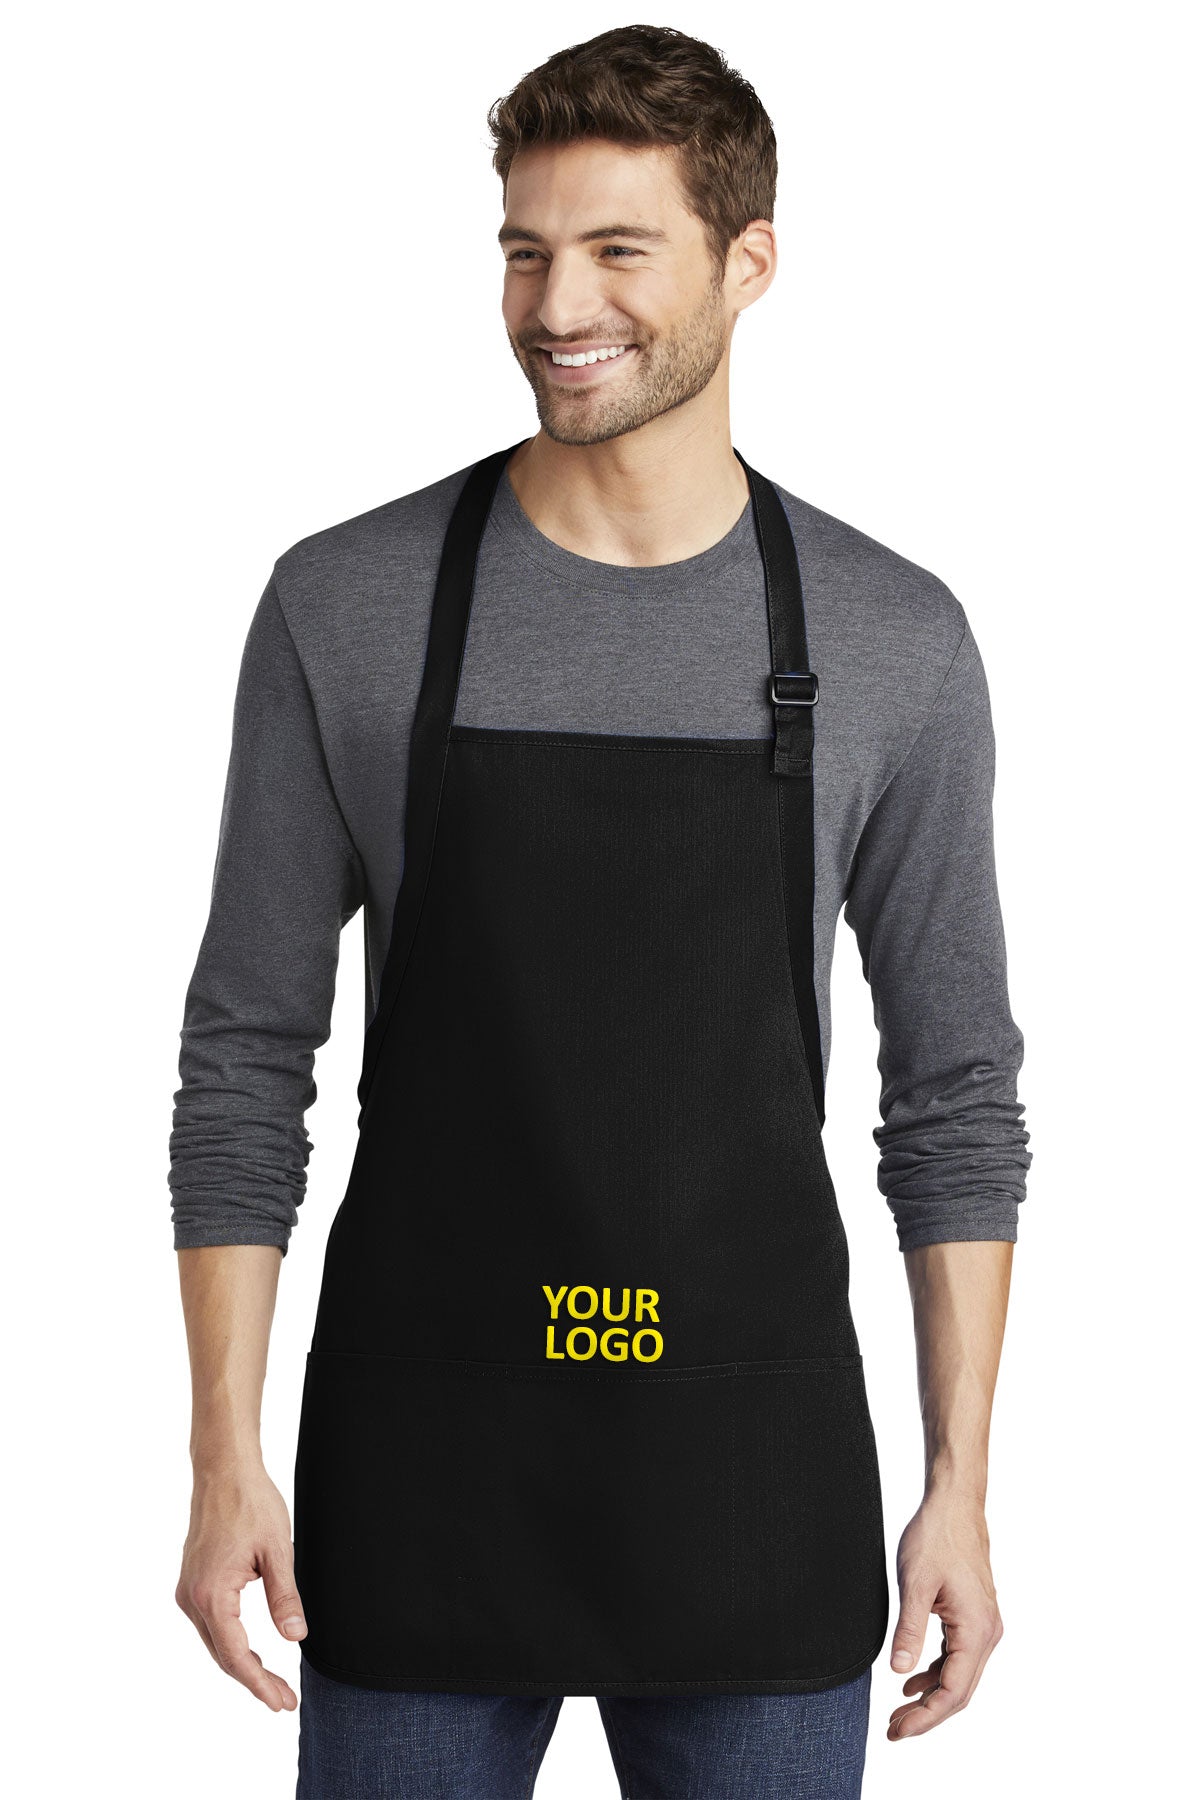 Port Authority Medium-Length Apron with Pouch Pockets A510 Black